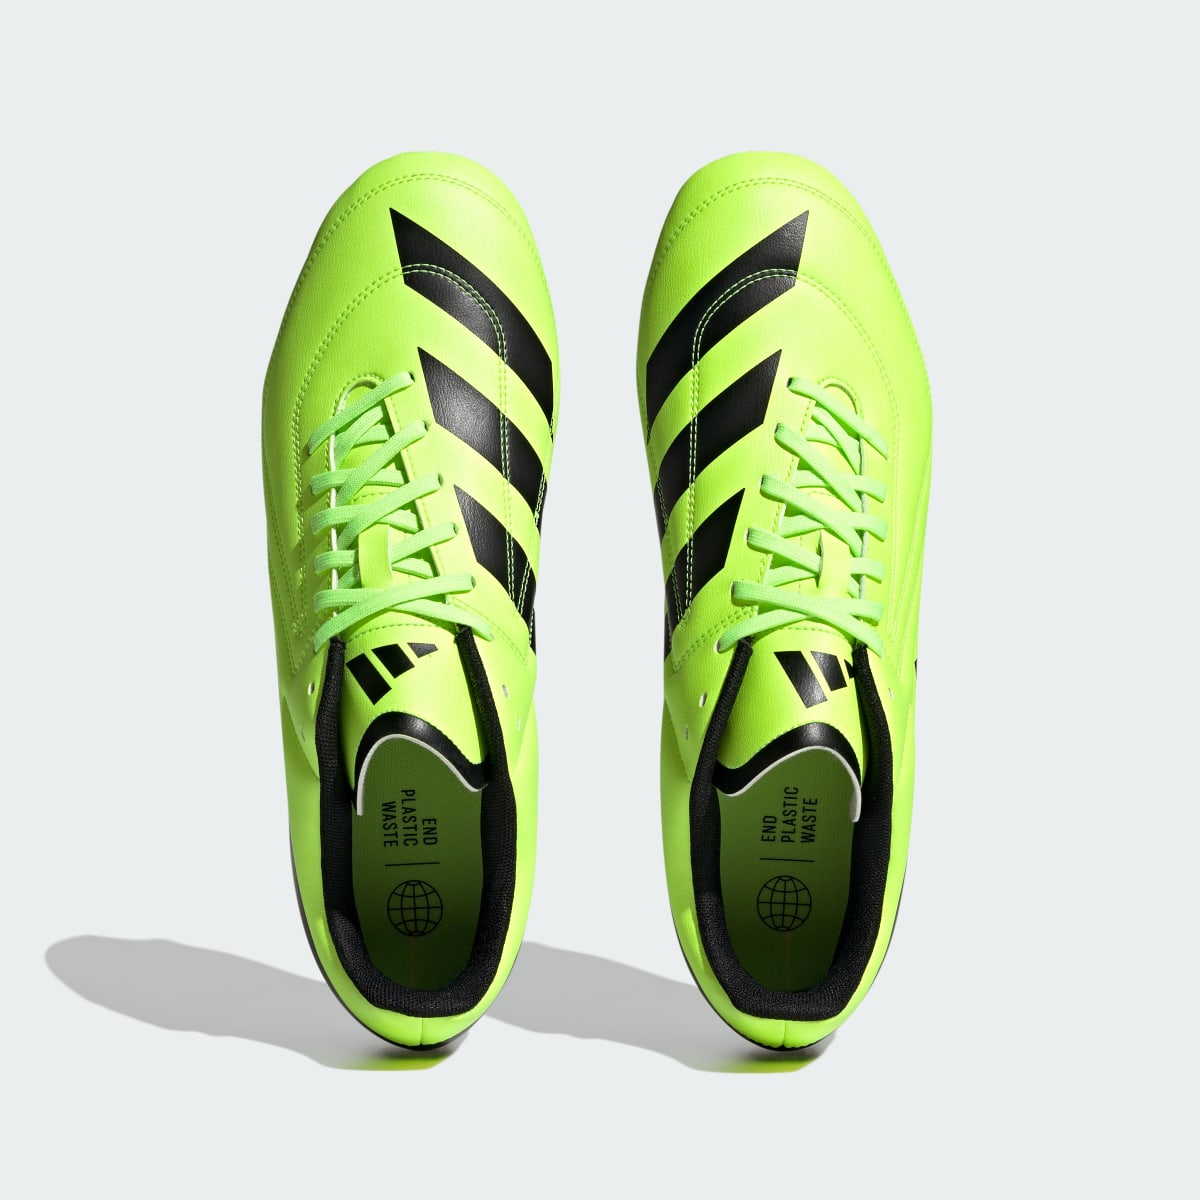 Adidas Buty RS15 Soft Ground Rugby. 6